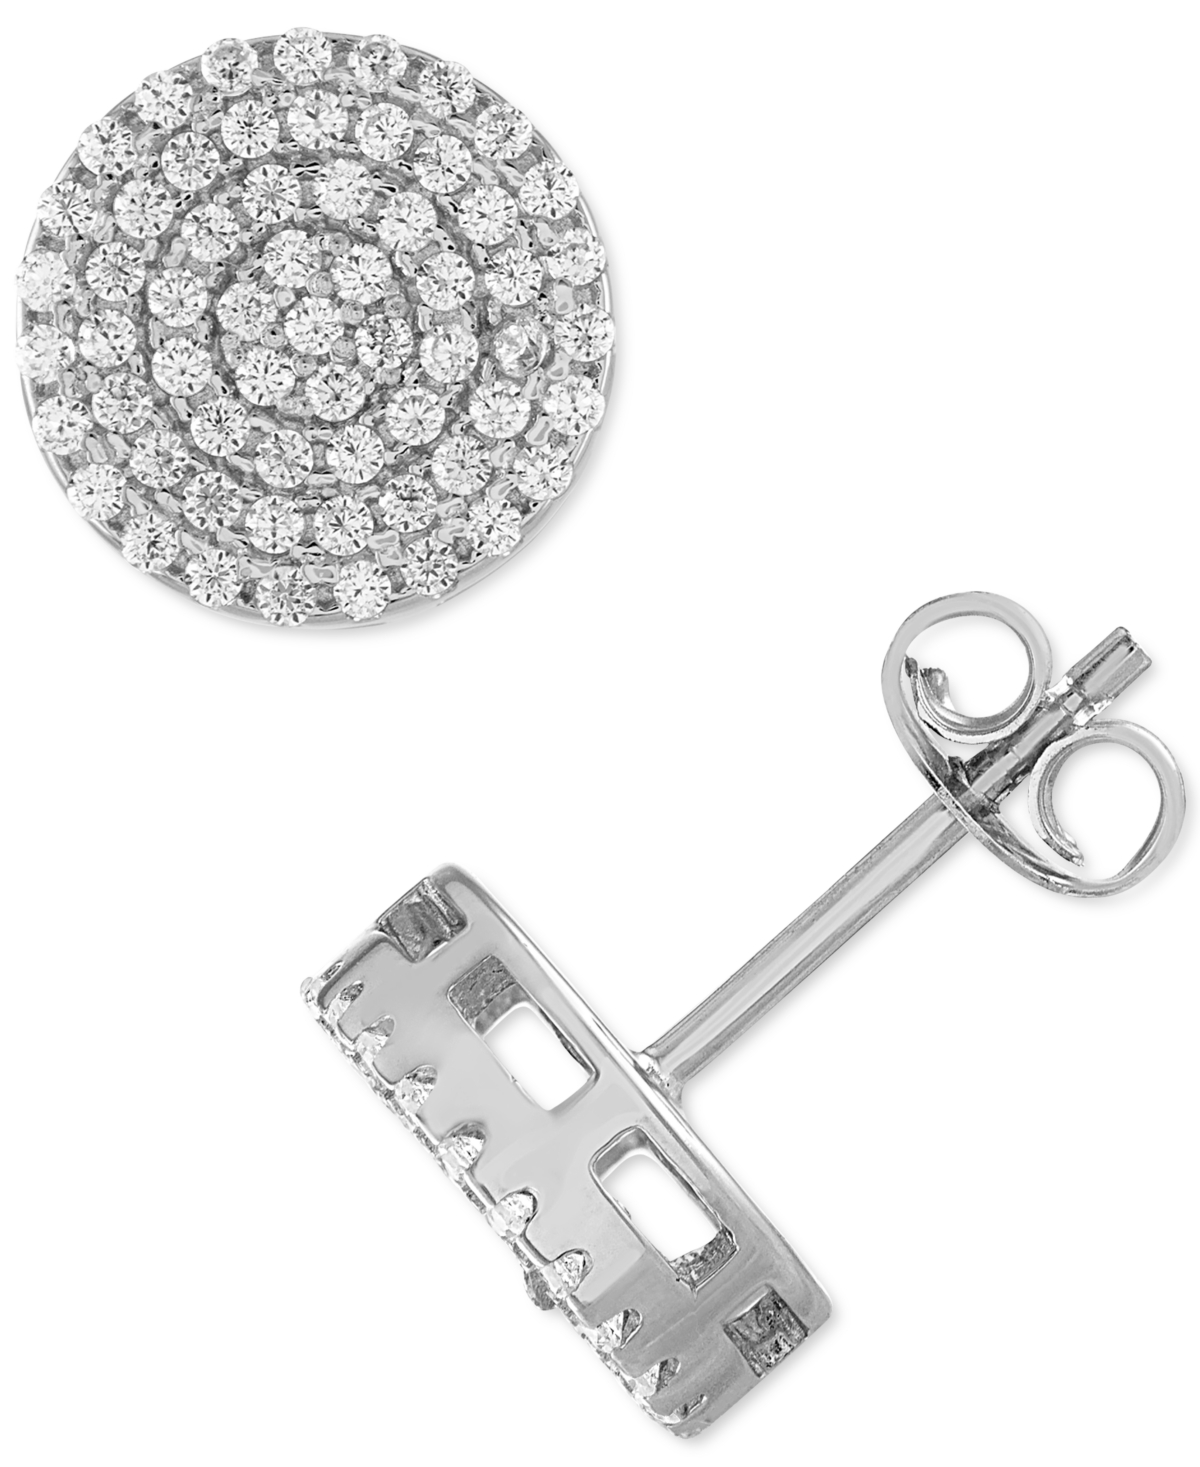 Cubic Zirconia Circle Cluster Stud Earrings in Sterling Silver, Created for Macy's - Silver